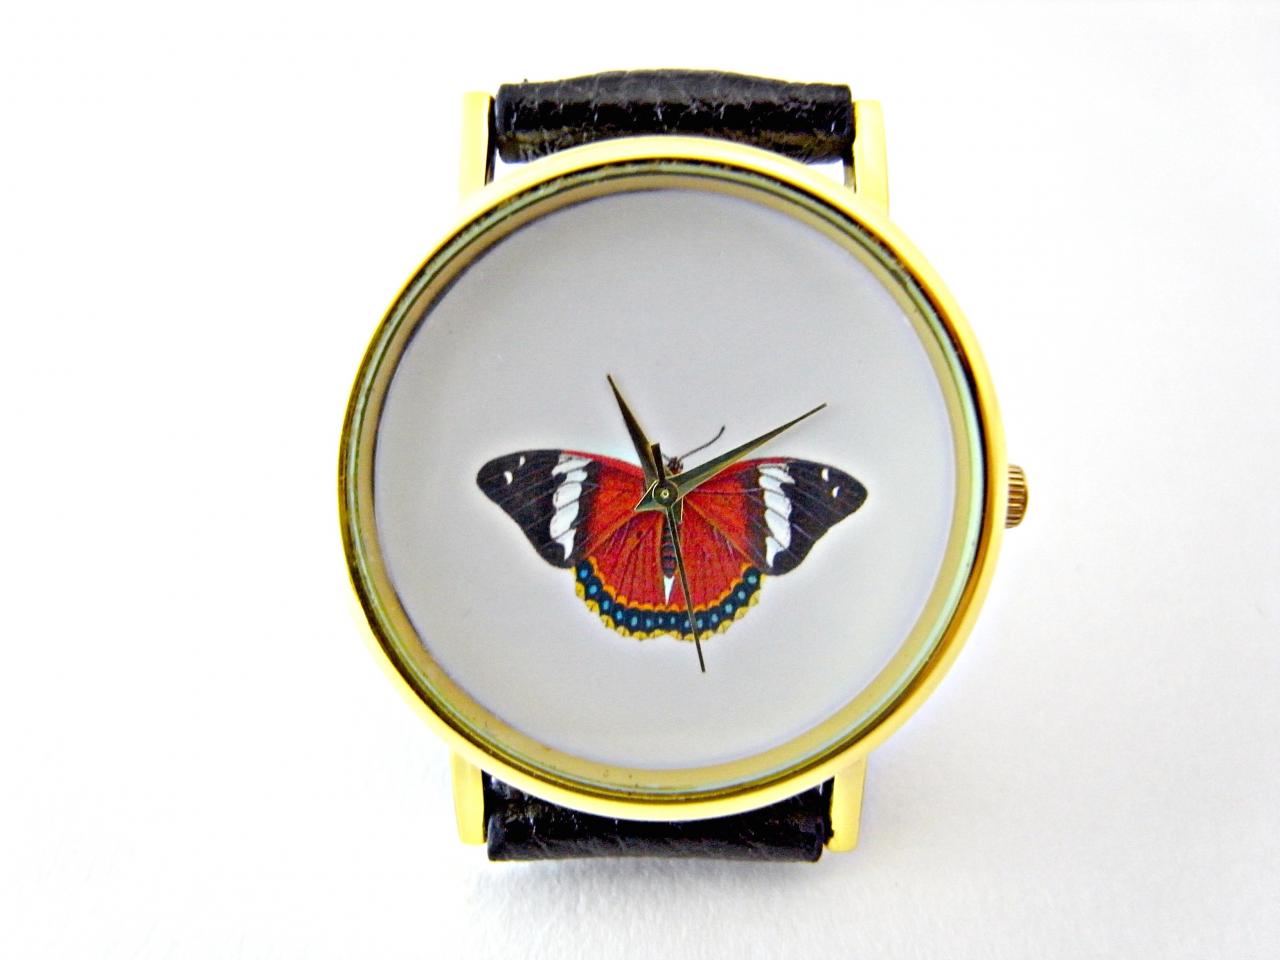 Butterfly Leather Wrist Watches, Woman Man Lady Unisex Watch, Genuine Leather Handmade Unique Watch #37